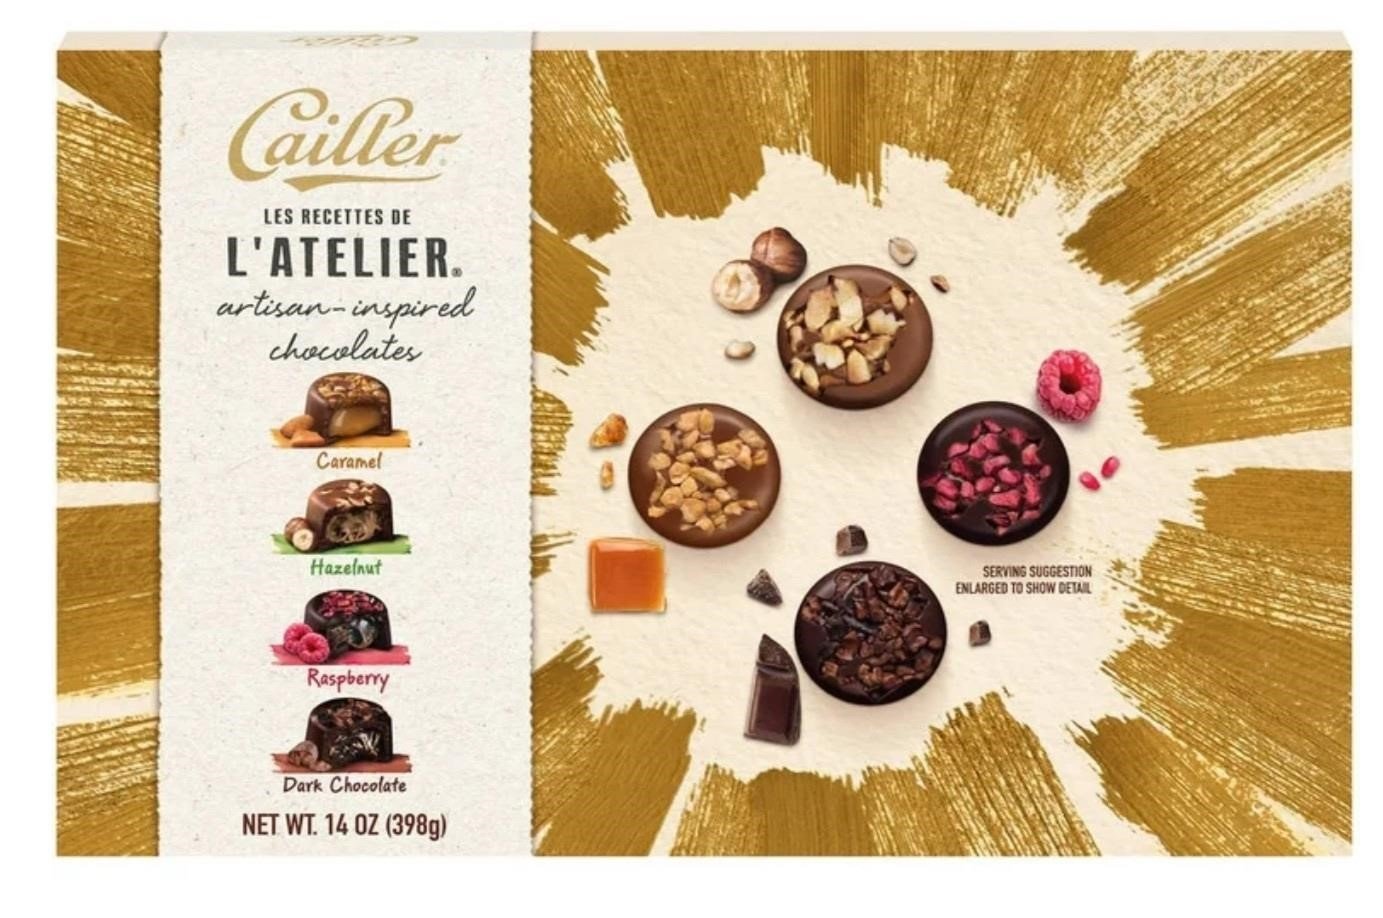 Cailler L'Atelier Artisan Inspired Chocolates 14oz